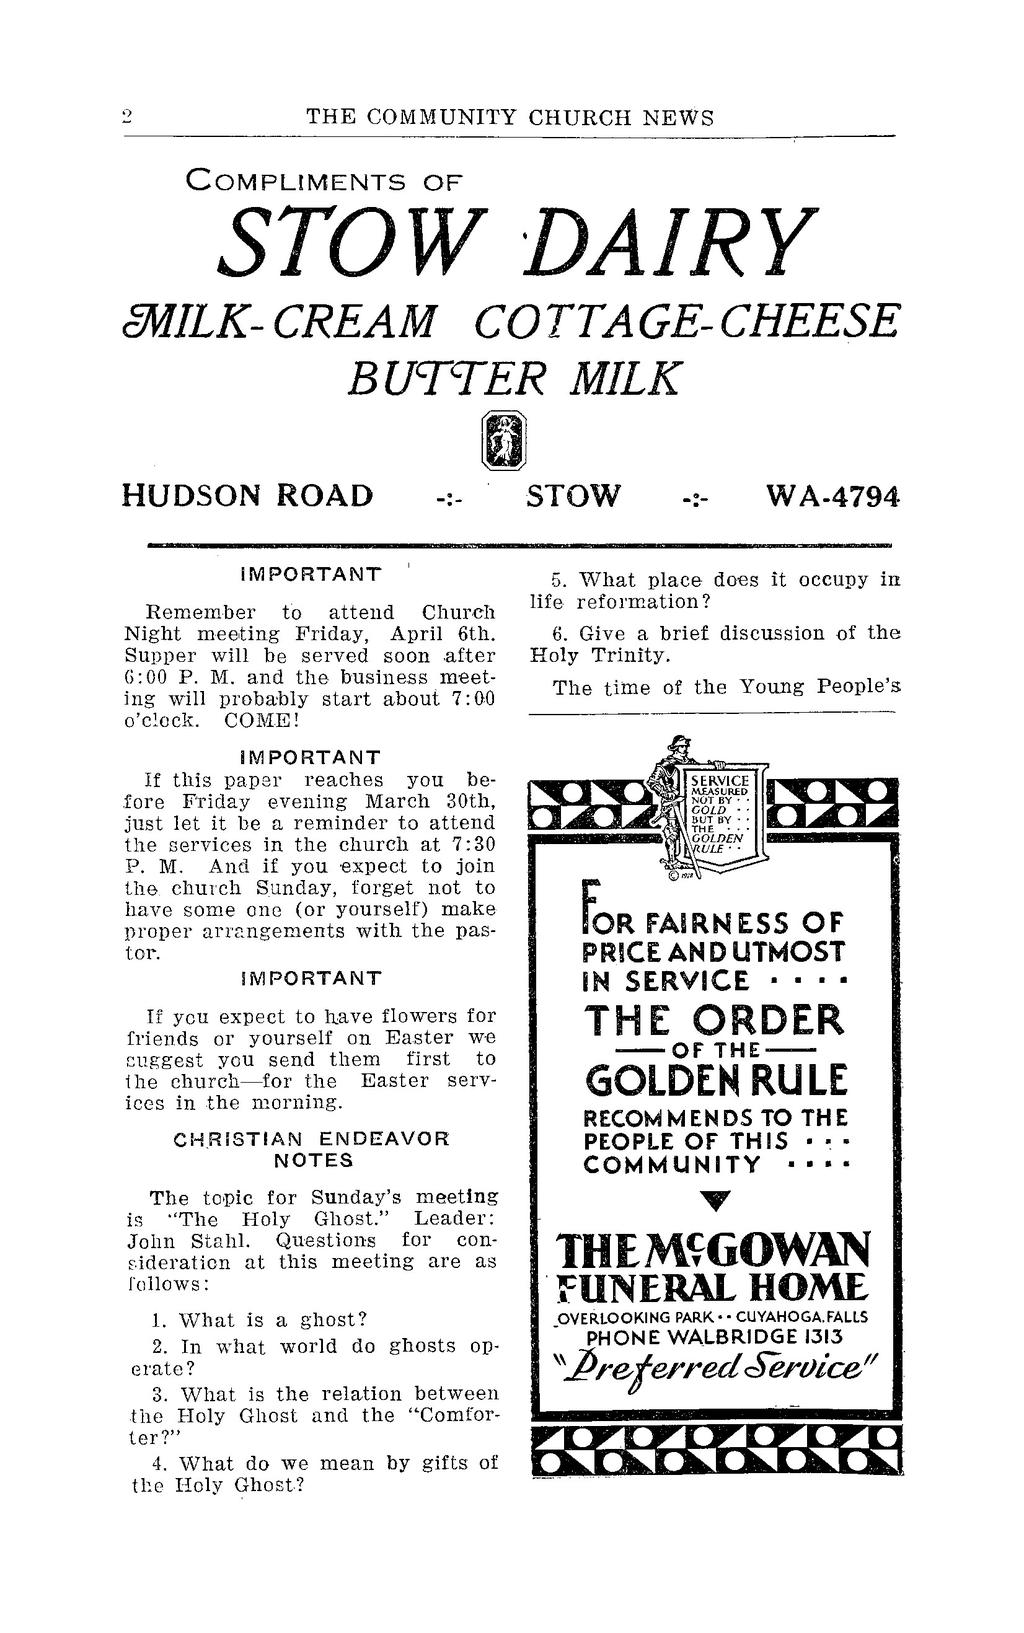 THtt COMMUNITY CHURCH NEWS o COMPLIMENTS OF STOW DAIRY milk-cream COTTAGE-CHEESE BUTTER MILK HUDSON ROAD -:- STOW -:- WA-4794 IMPORTANT Remember to attend Church Night meeting Friday, April 6th.